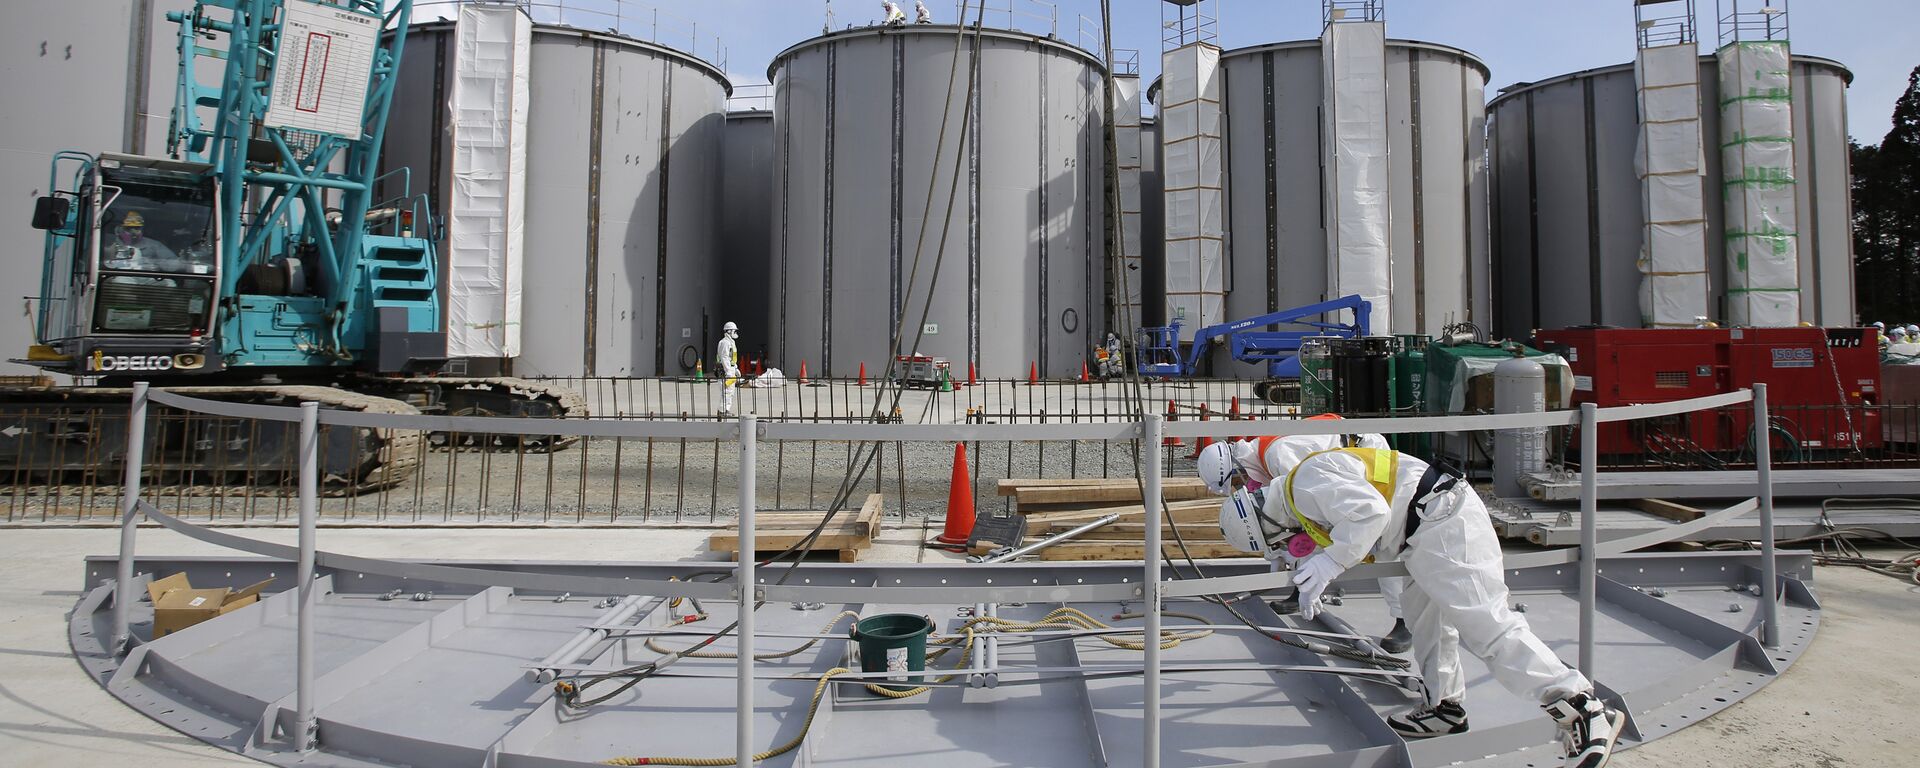 Men wearing protective suits and masks work in front of welding storage tanks for radioactive water, under construction in the J1 area at the Tokyo Electric Power Co's (TEPCO) tsunami-crippled Fukushima Daiichi nuclear power plant in Okuma in Fukushima prefecture. (File) - Sputnik International, 1920, 28.06.2023